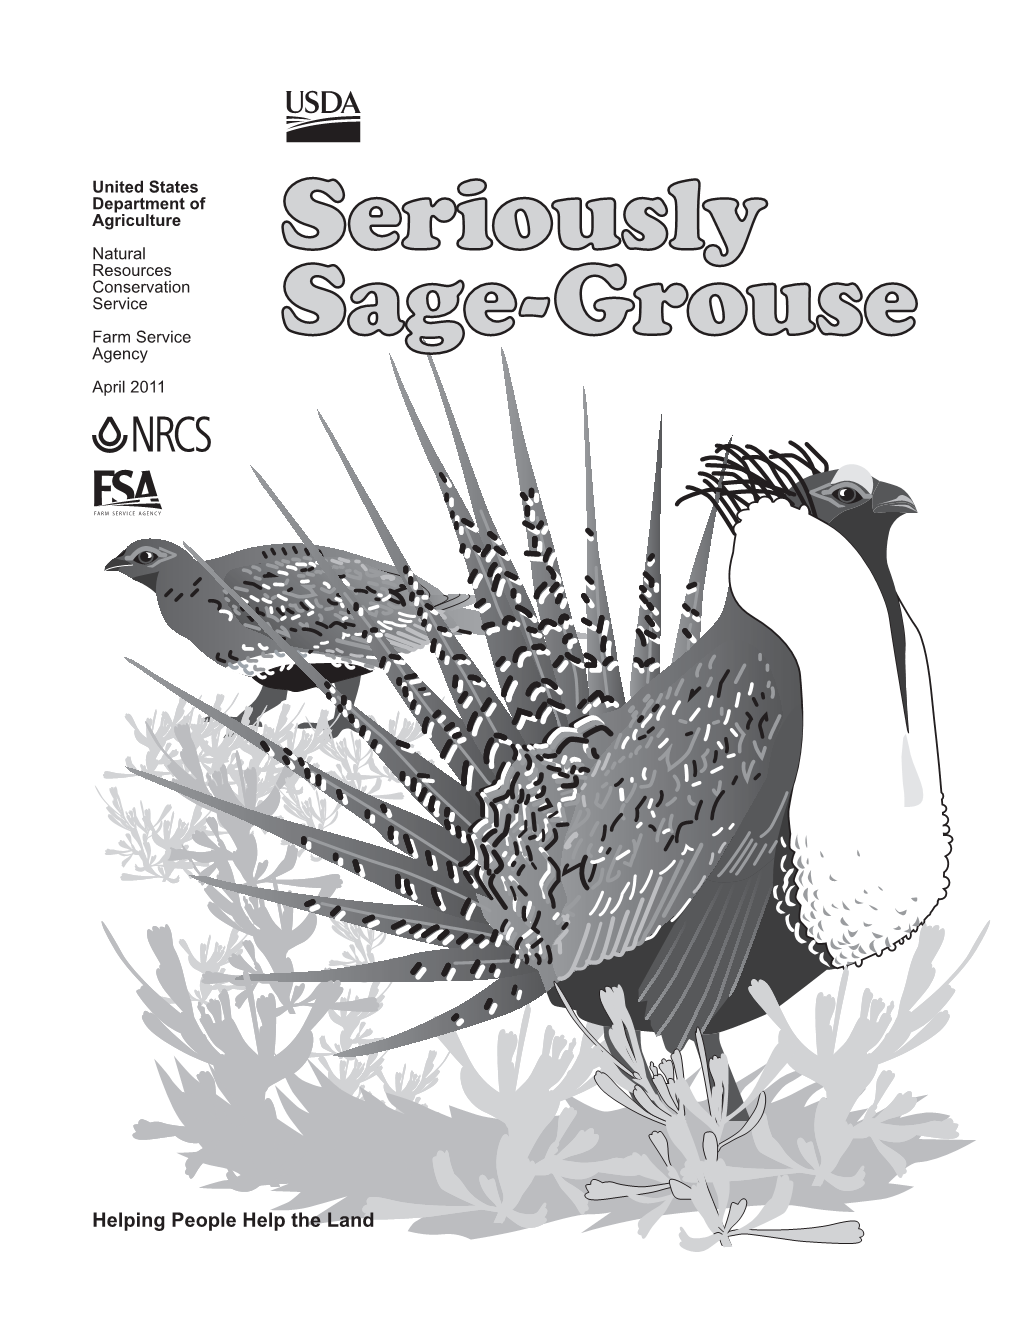 Seriously Sage-Grouse